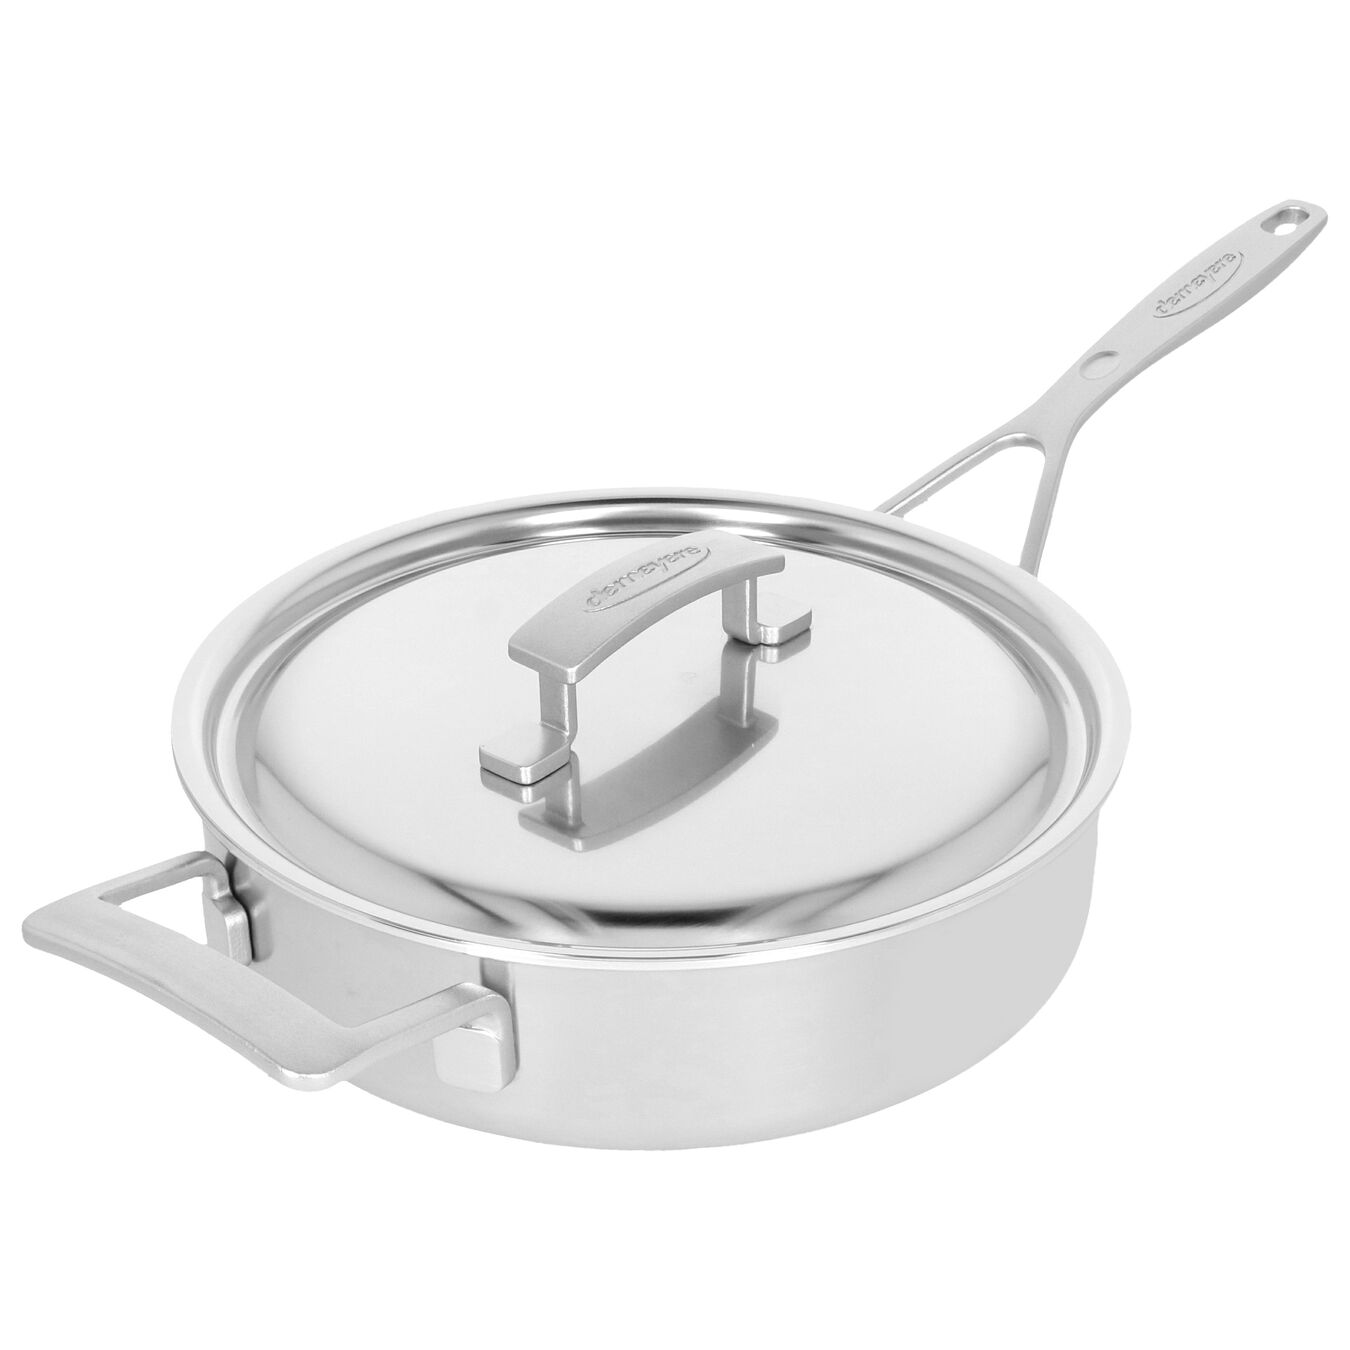 24 cm 18/10 Stainless Steel Saute pan with lid,,large 3